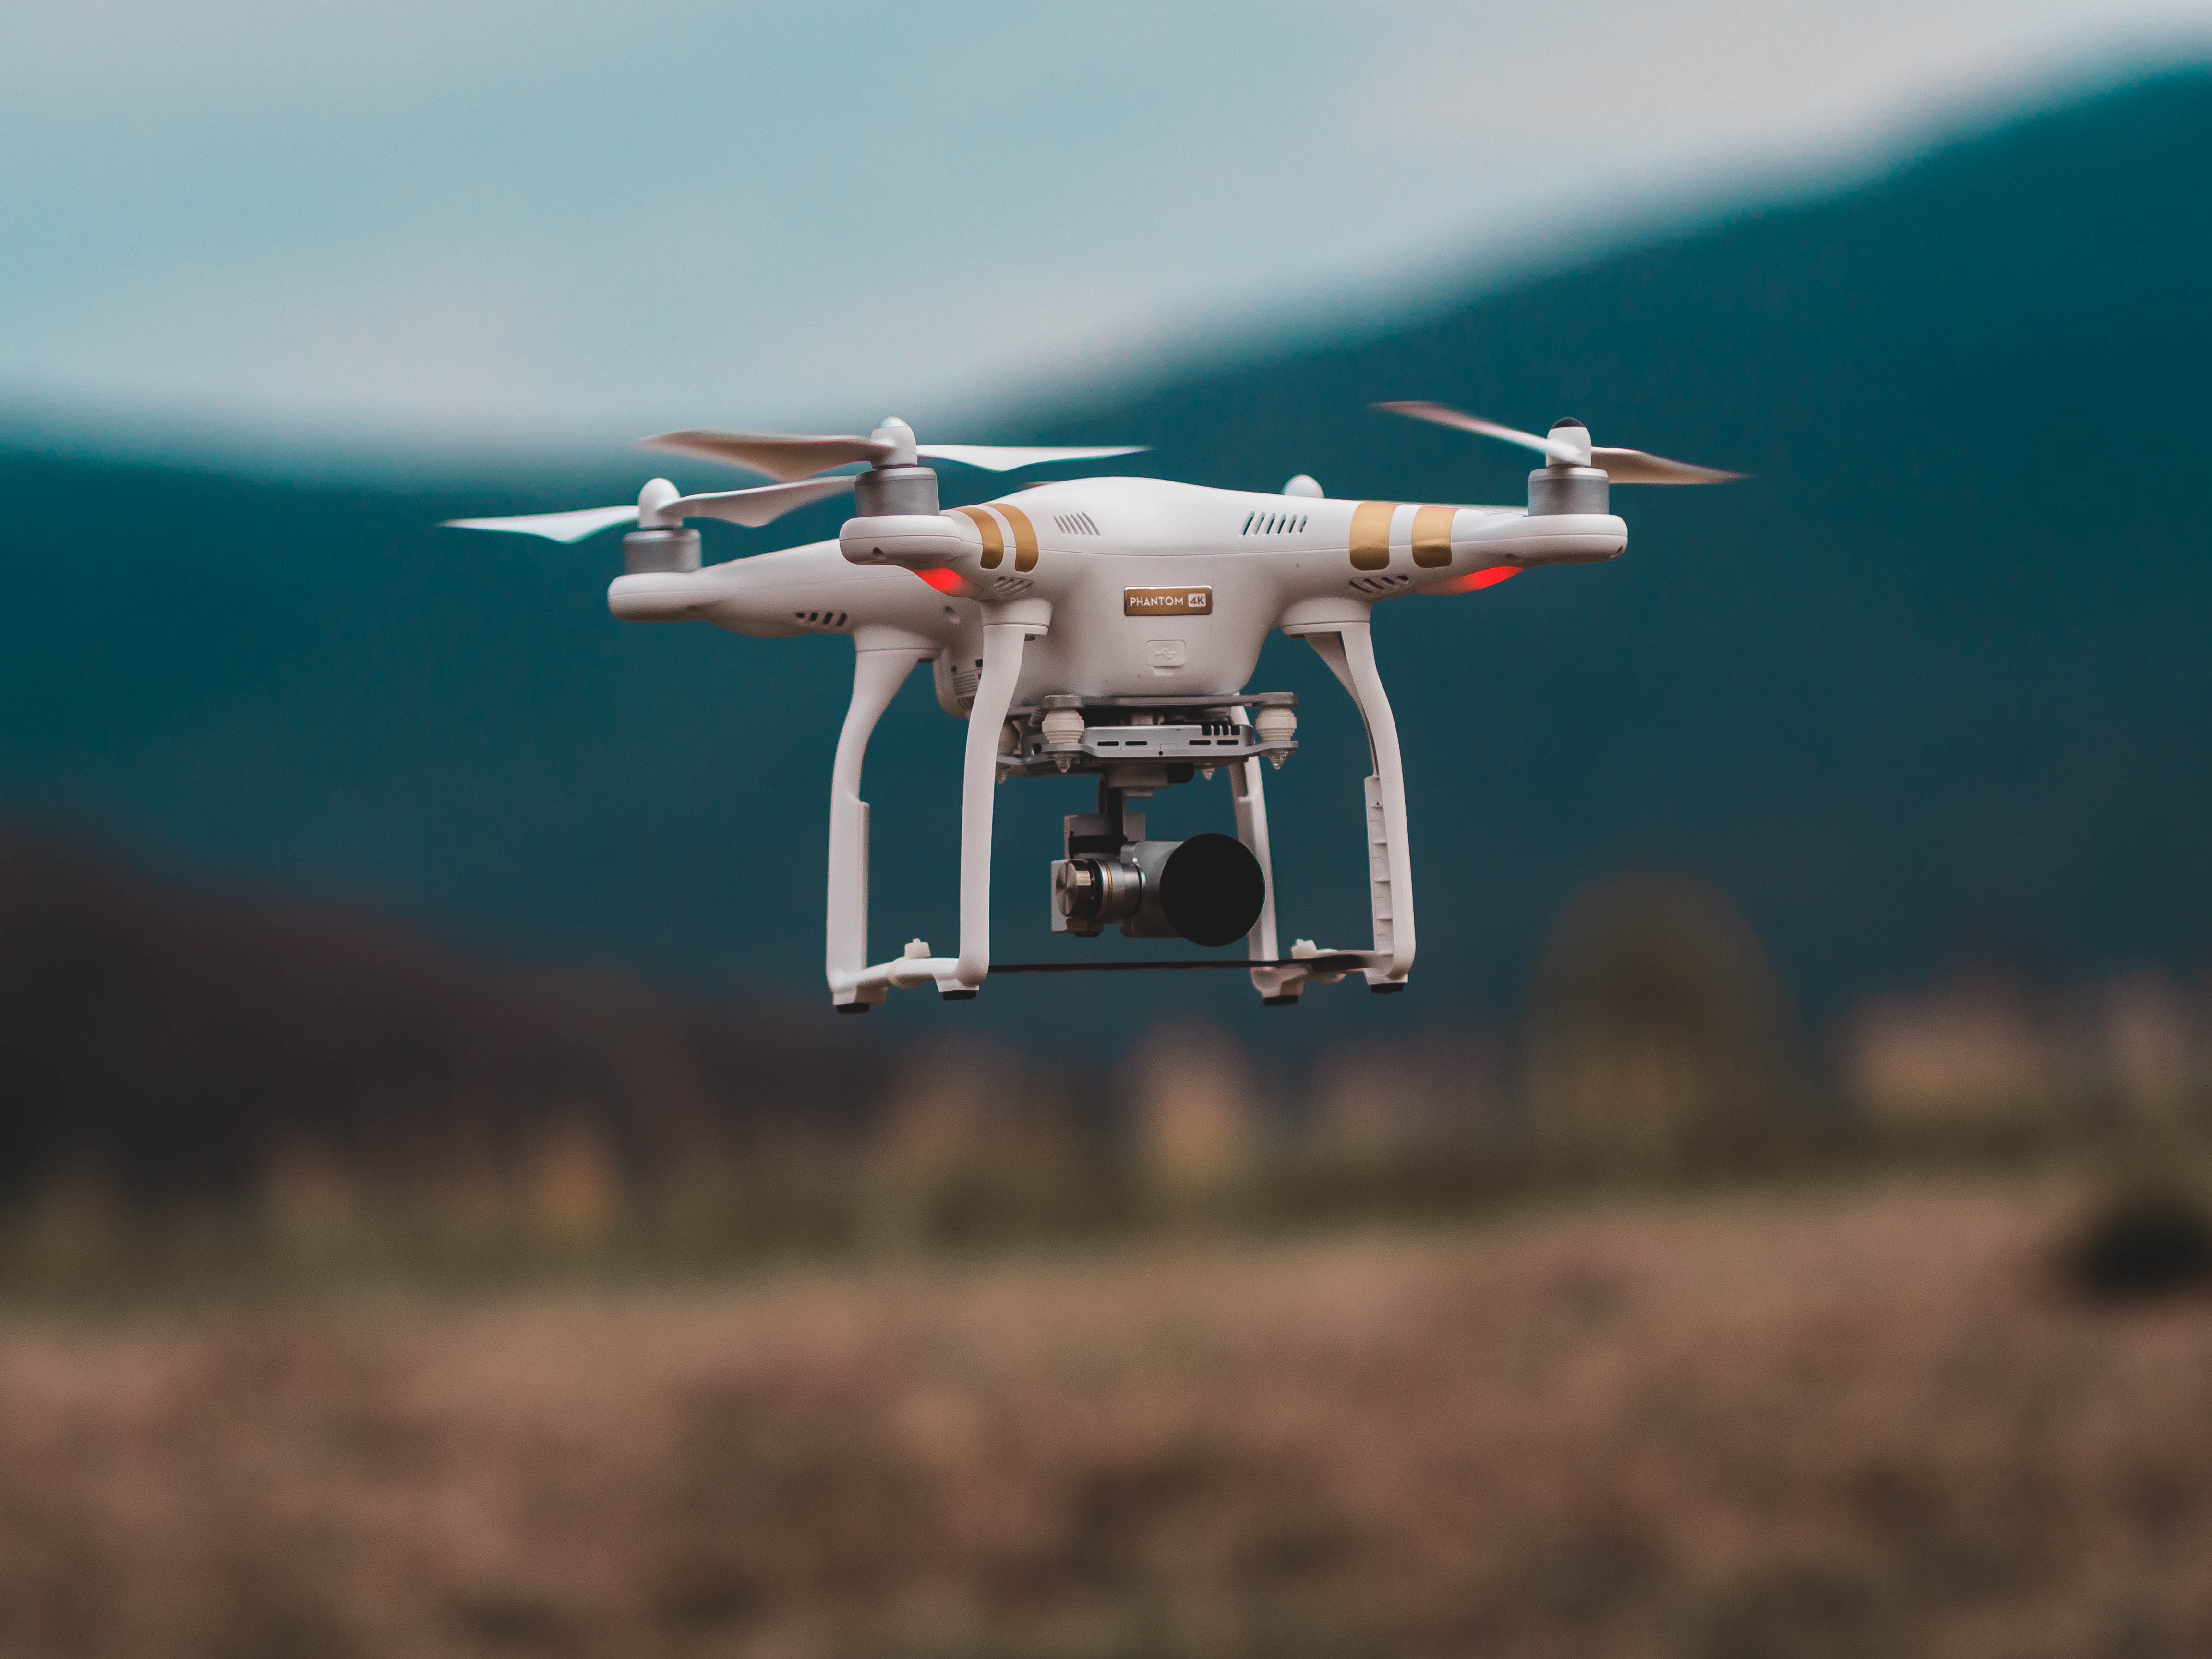 The Metropolitan police will become the first British force to deploy a drone to monitor road users later in July 2019.